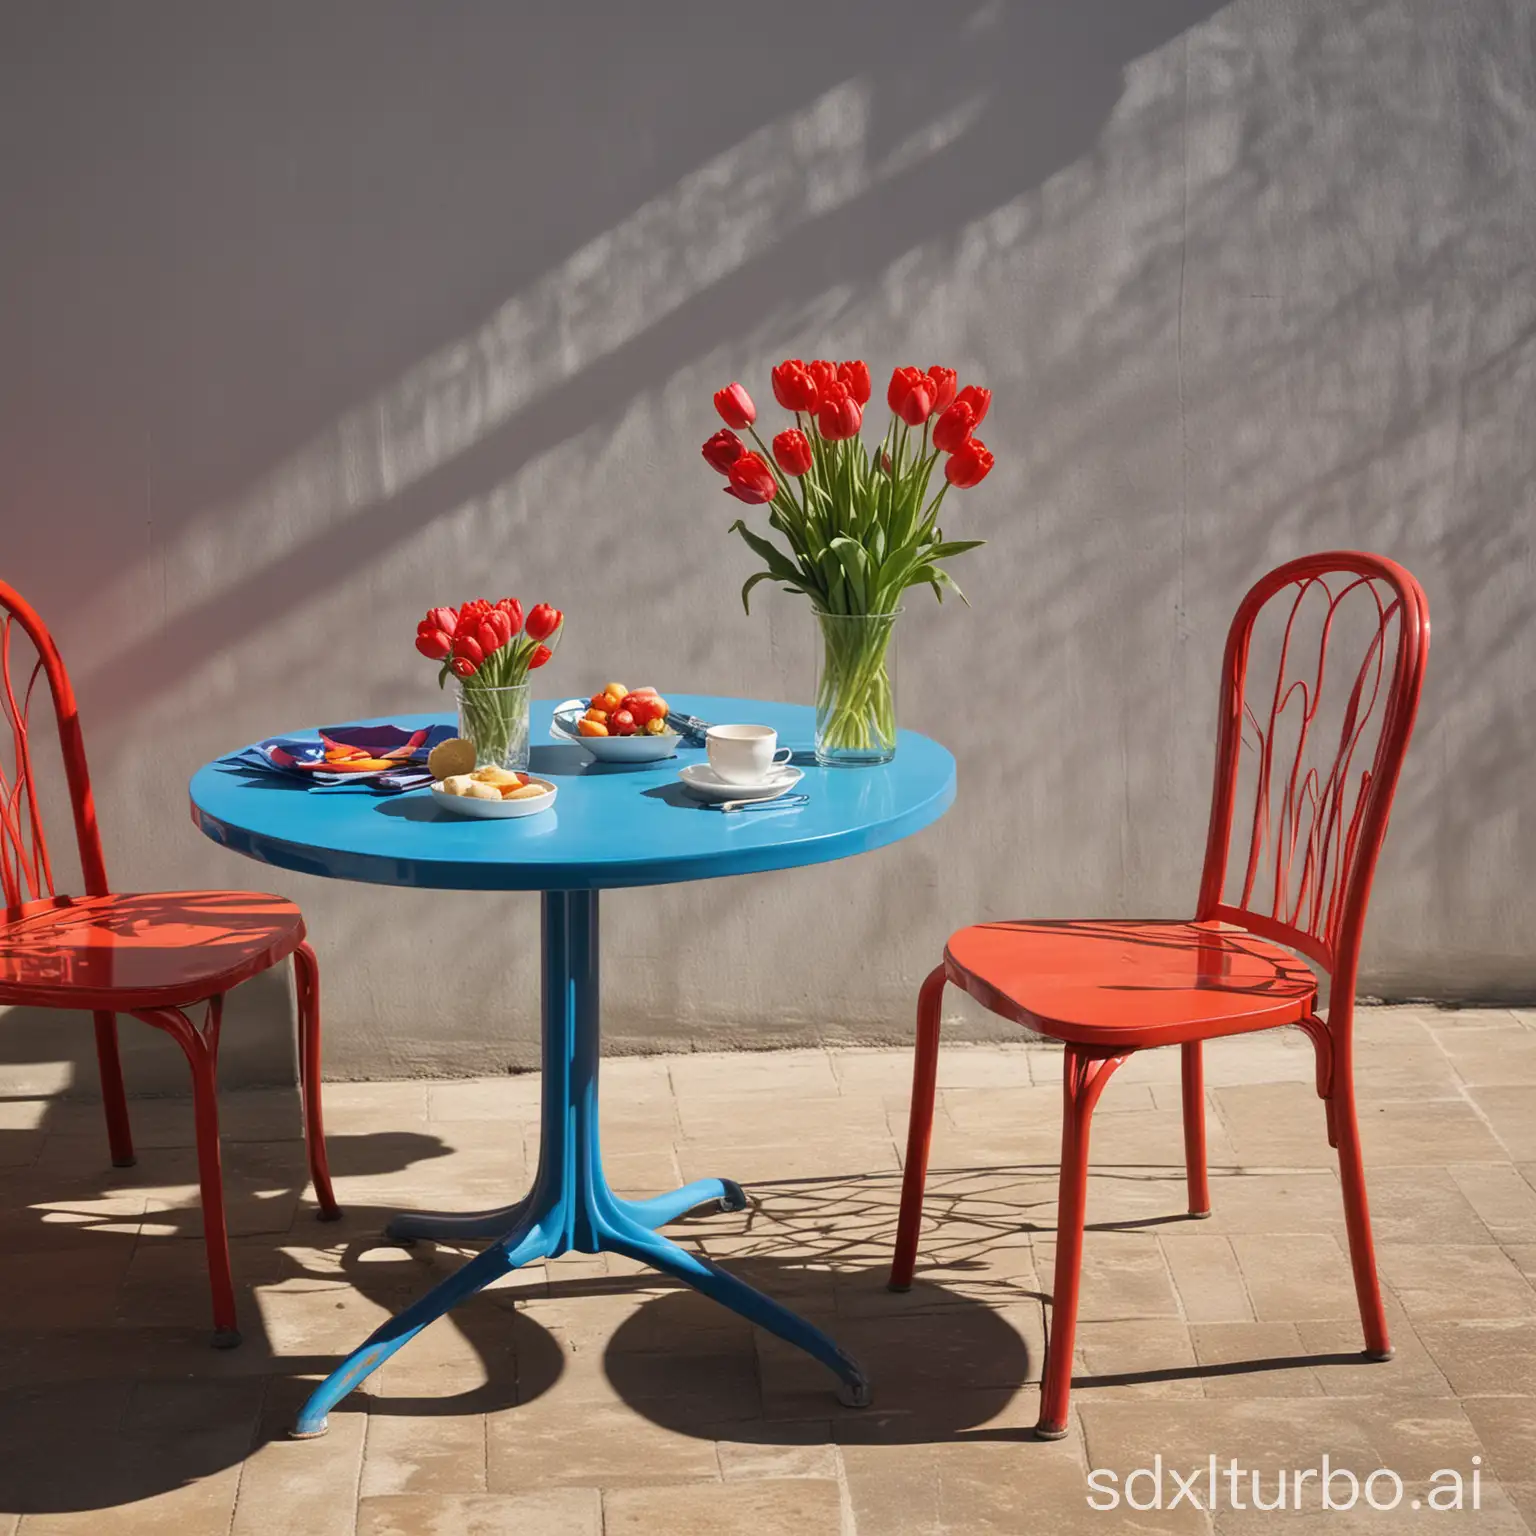 Vibrant-Red-Tulip-on-Blue-Table-with-Chair-under-Sunshine